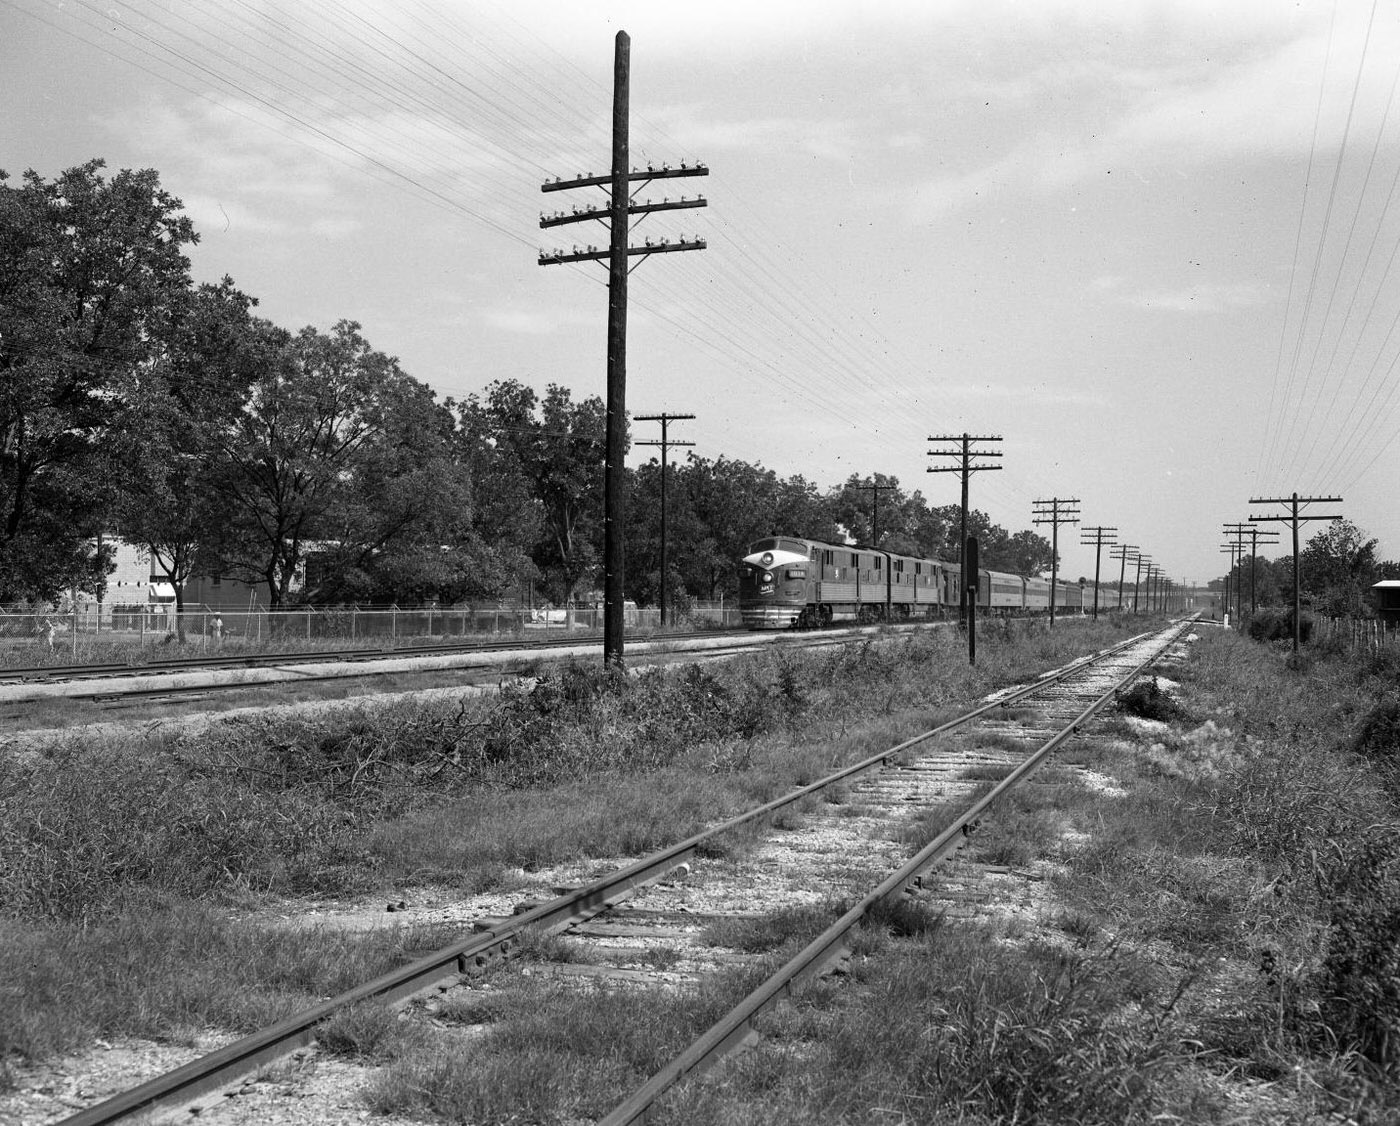 Train Approaching on Tracks in Countryside, 1954.